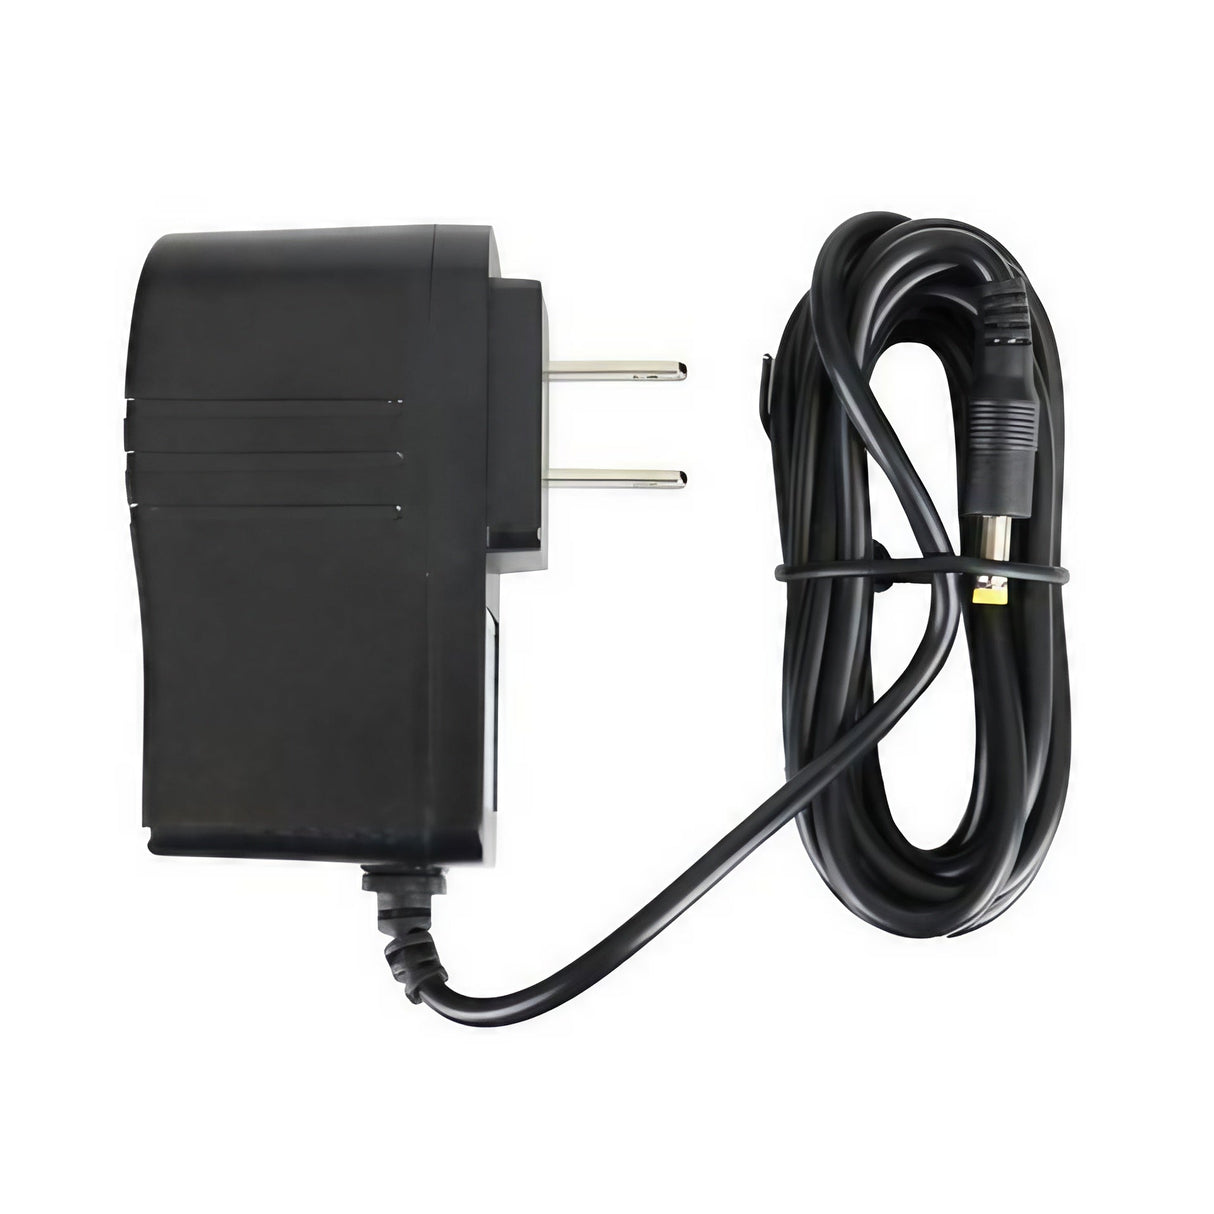 Arizer Solo2 Wall Charger in black, compact design, plug-in power supply for vaporizers, side view